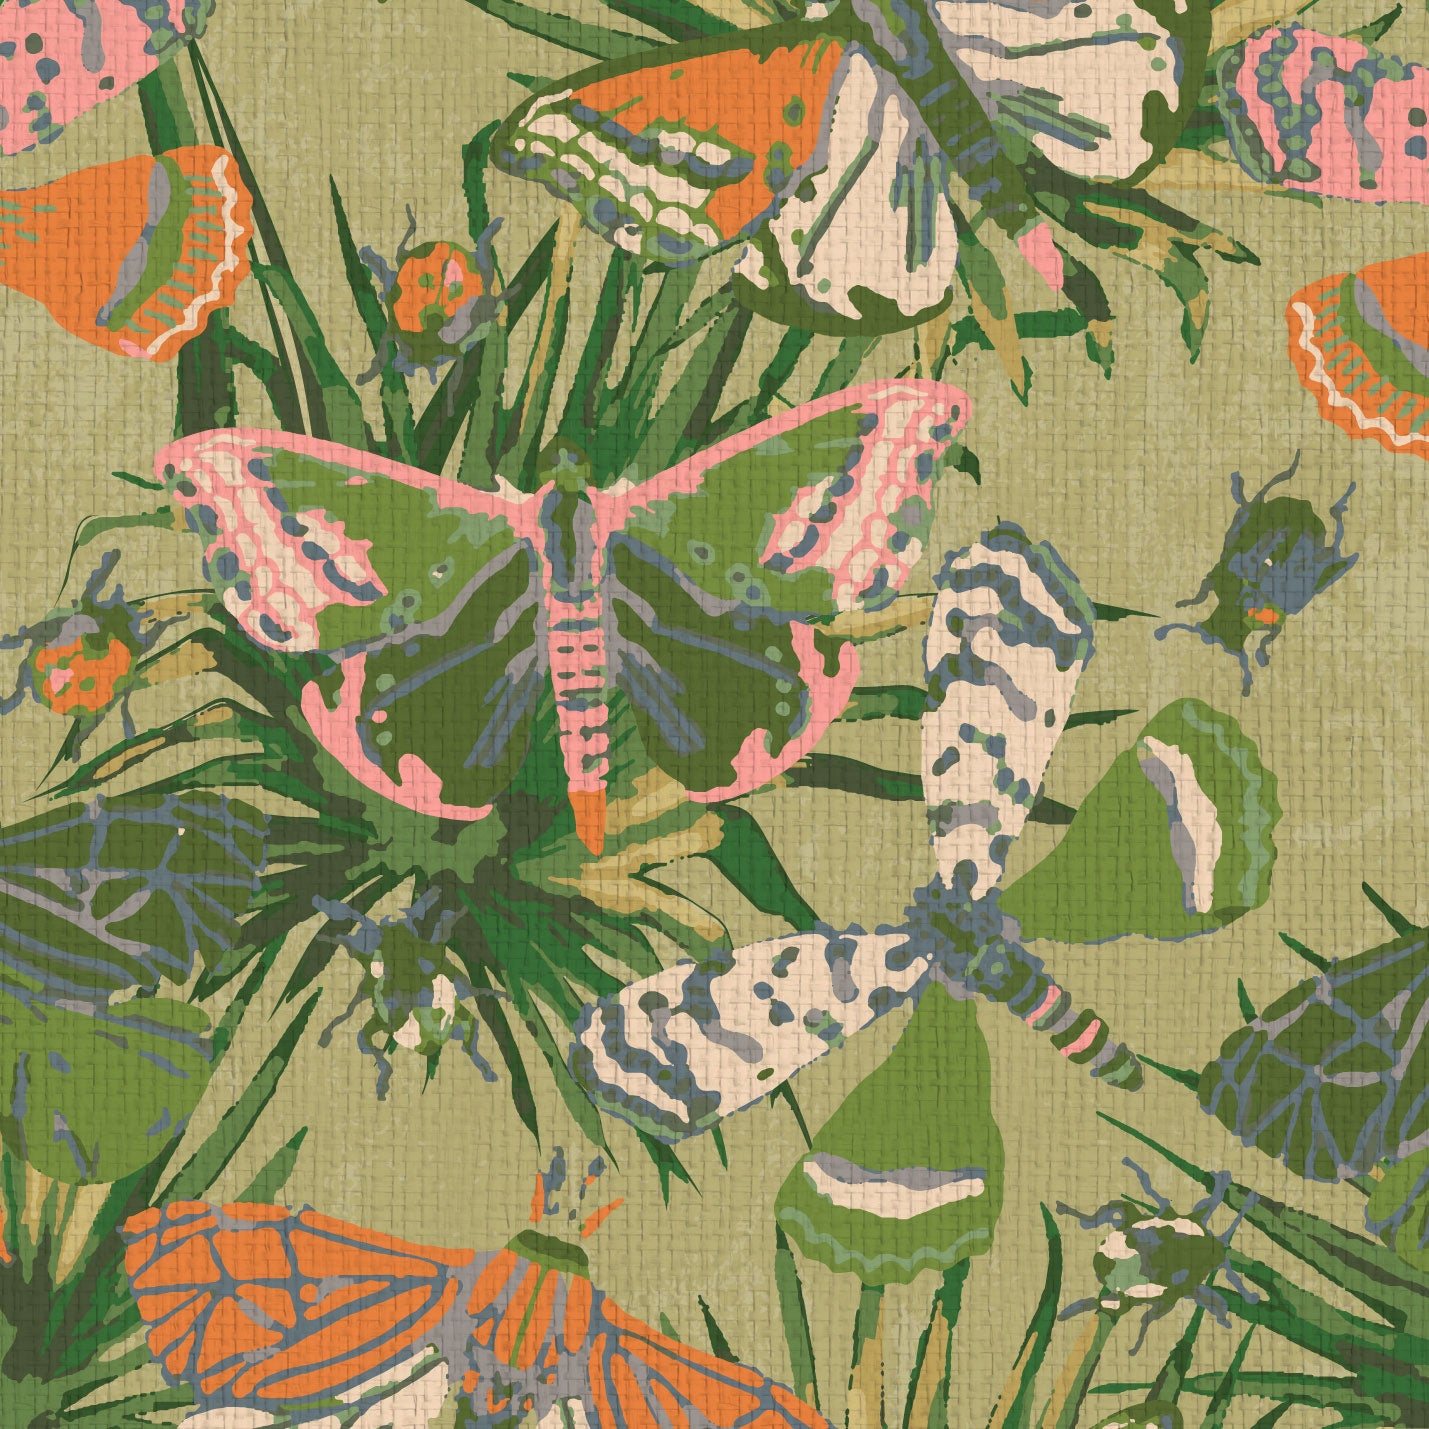 wallpaper Natural Textured Eco-Friendly Non-toxic High-quality Sustainable Interior Design Bold Custom Tailor-made Retro chic Bold tropical butterfly bug palm leaves animals botanical garden nature kids playroom bedroom nursery green moss jungle olive paper weave paperweave